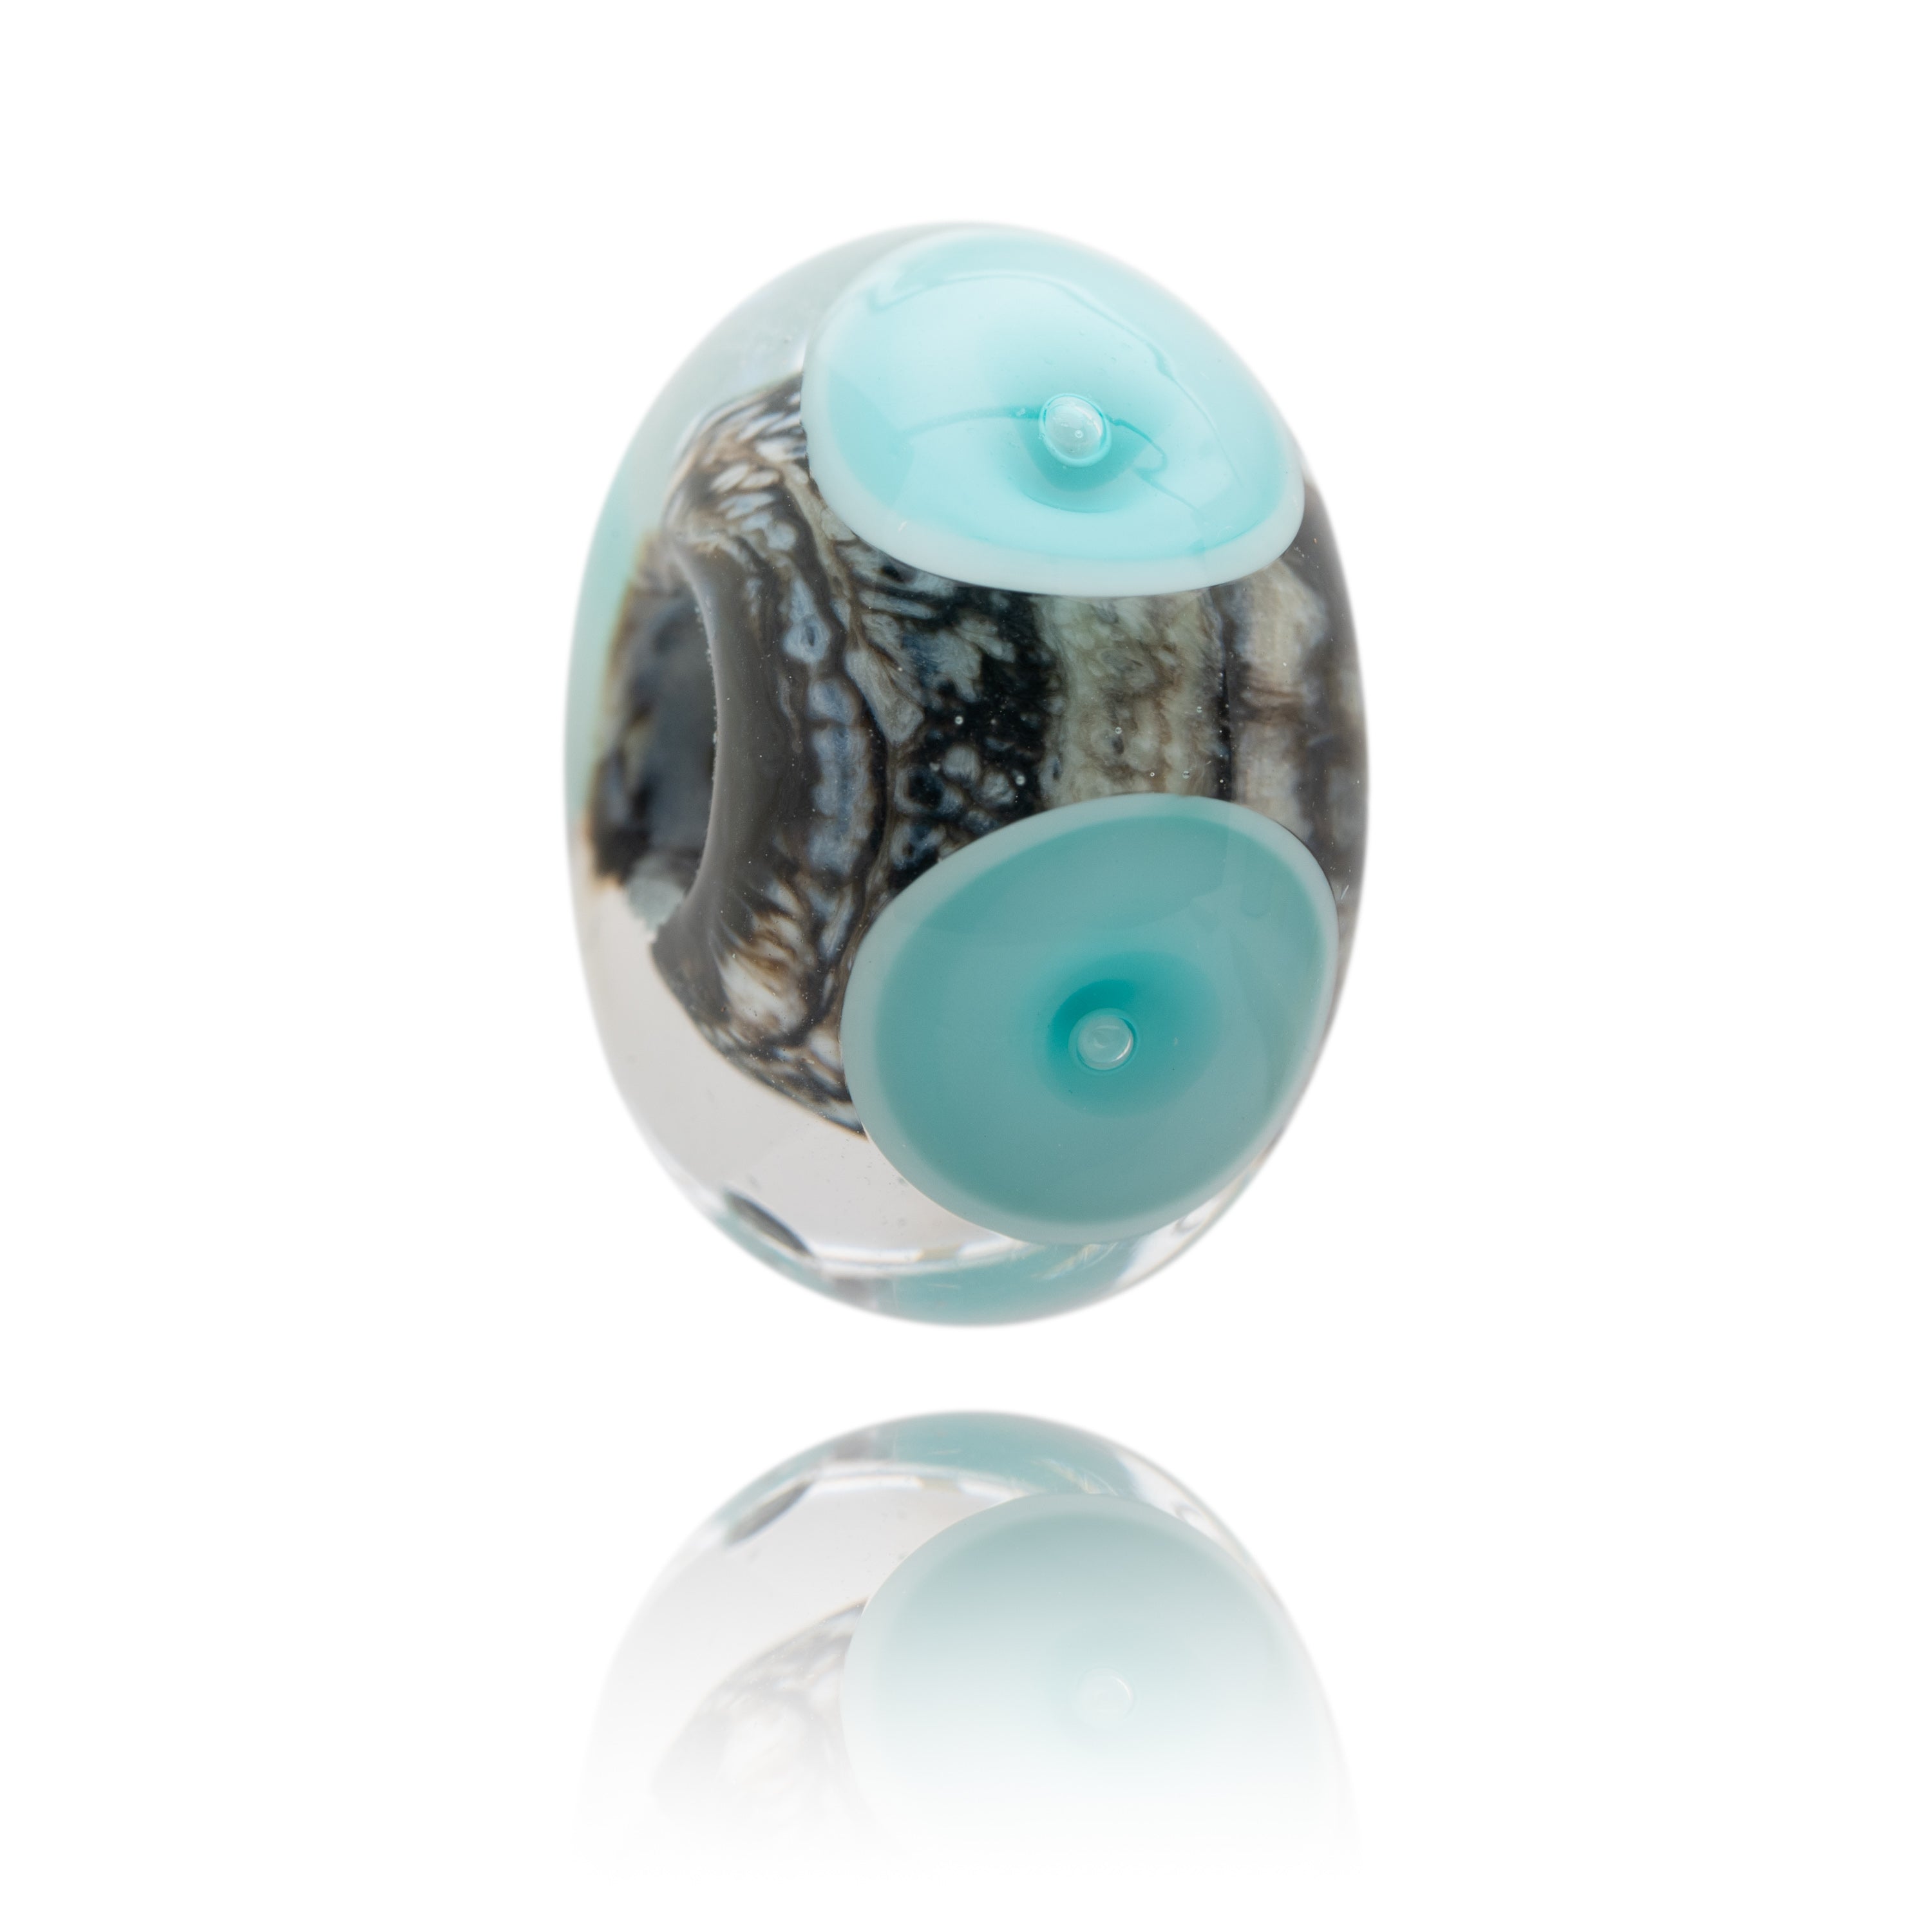 Glass bead representing Summerleaze beach in Bude, Cornwall. Made with Brown core and turquoise dots on the surface.